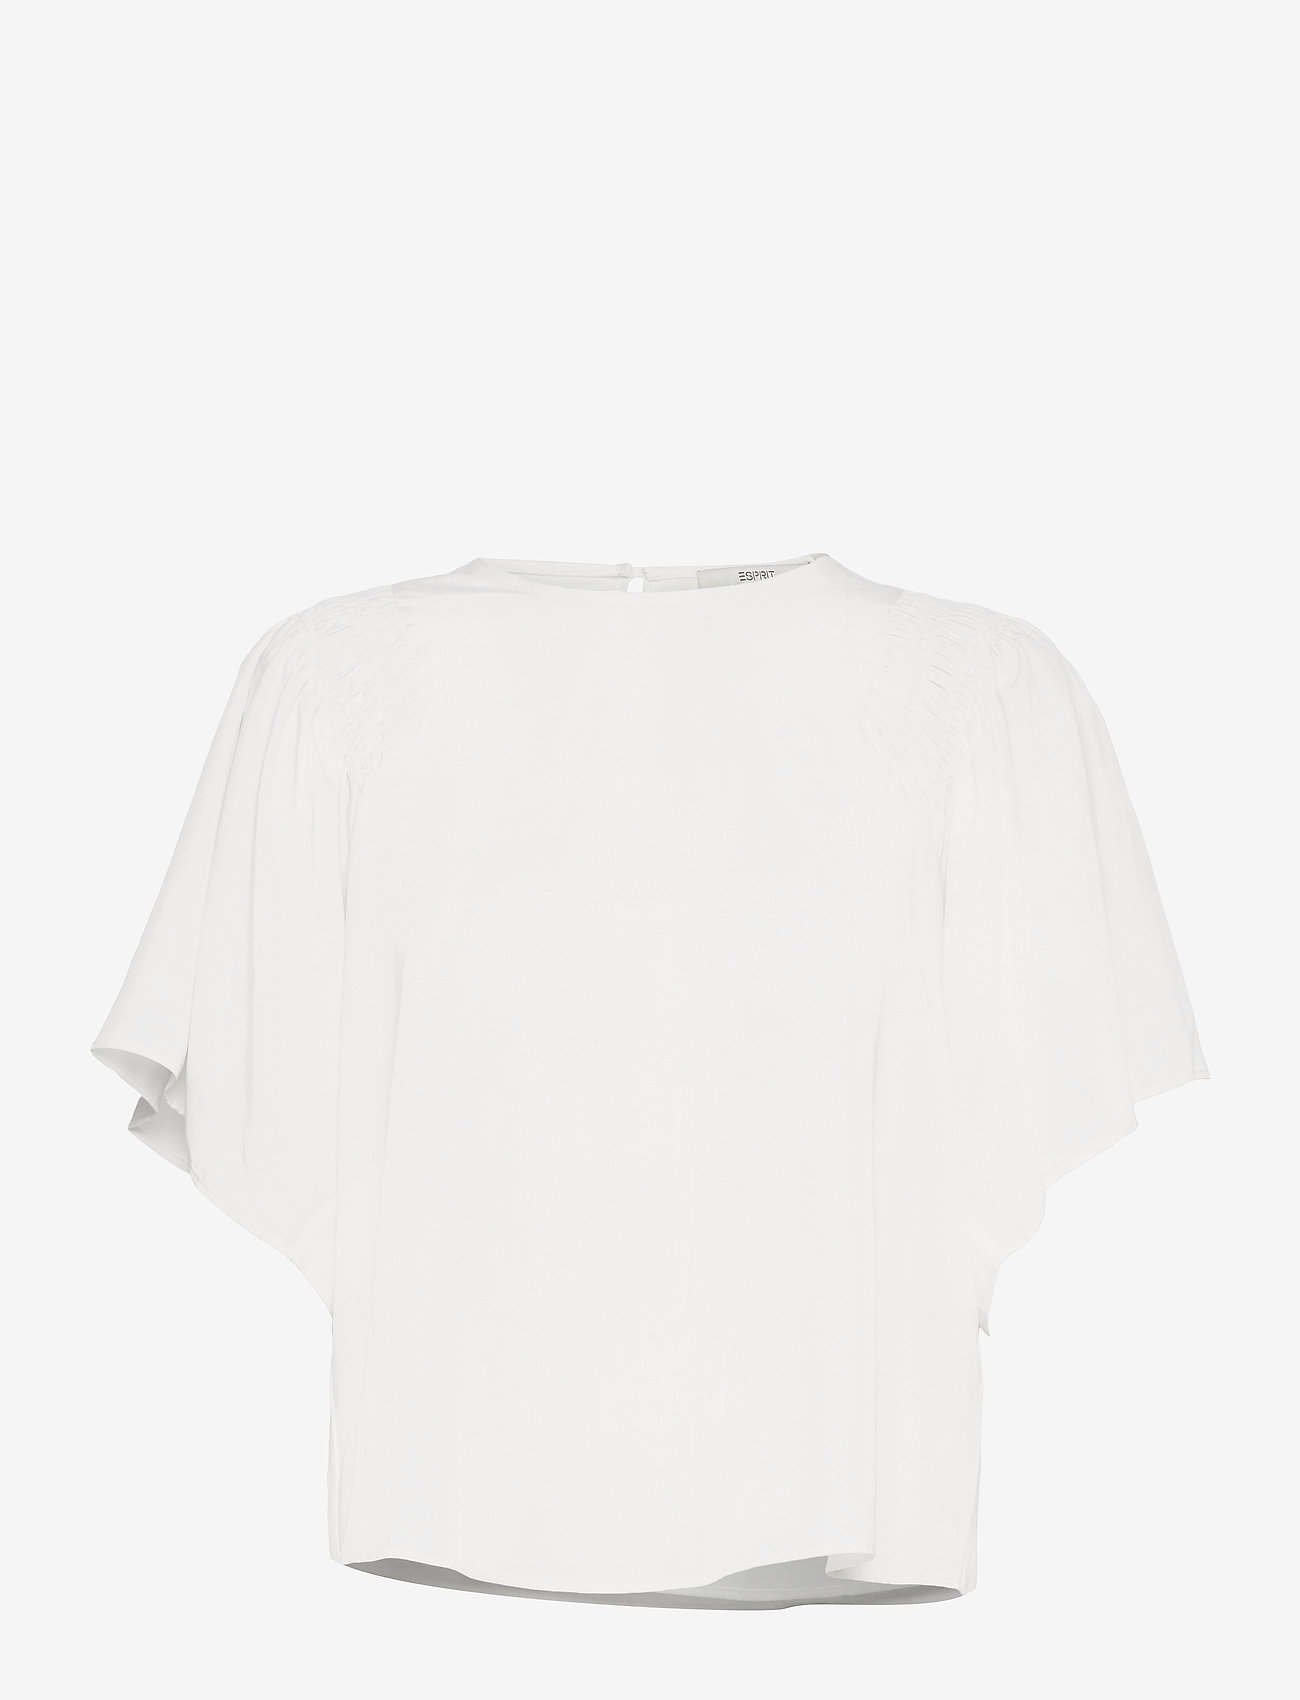 Esprit Casual - Blouse in TENCEL™ lyocell - short-sleeved blouses - off white - 0